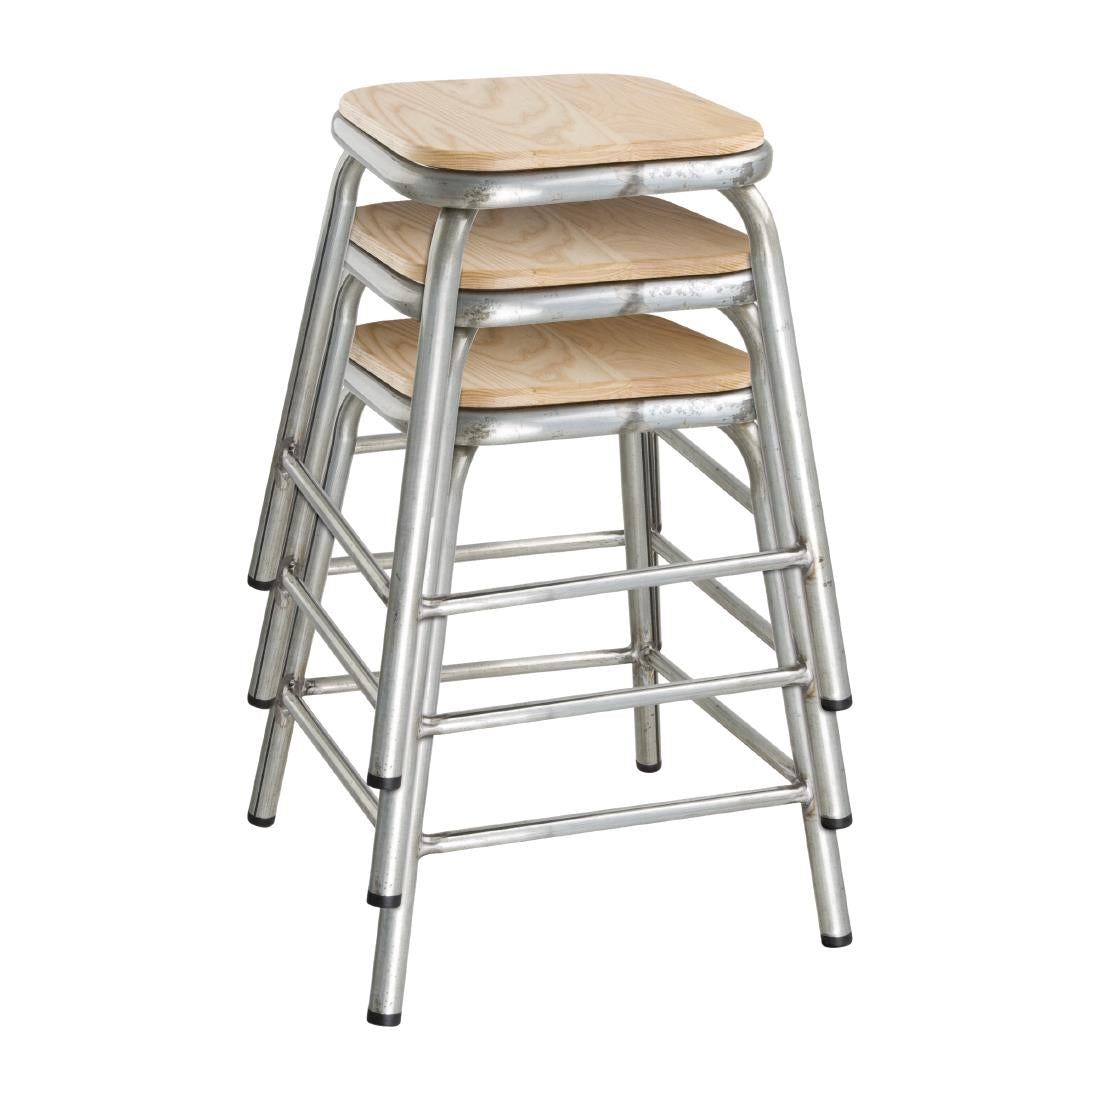 Bolero Galvanised Steel Stools with Wooden Seatpad (Pack of 4) JD Catering Equipment Solutions Ltd